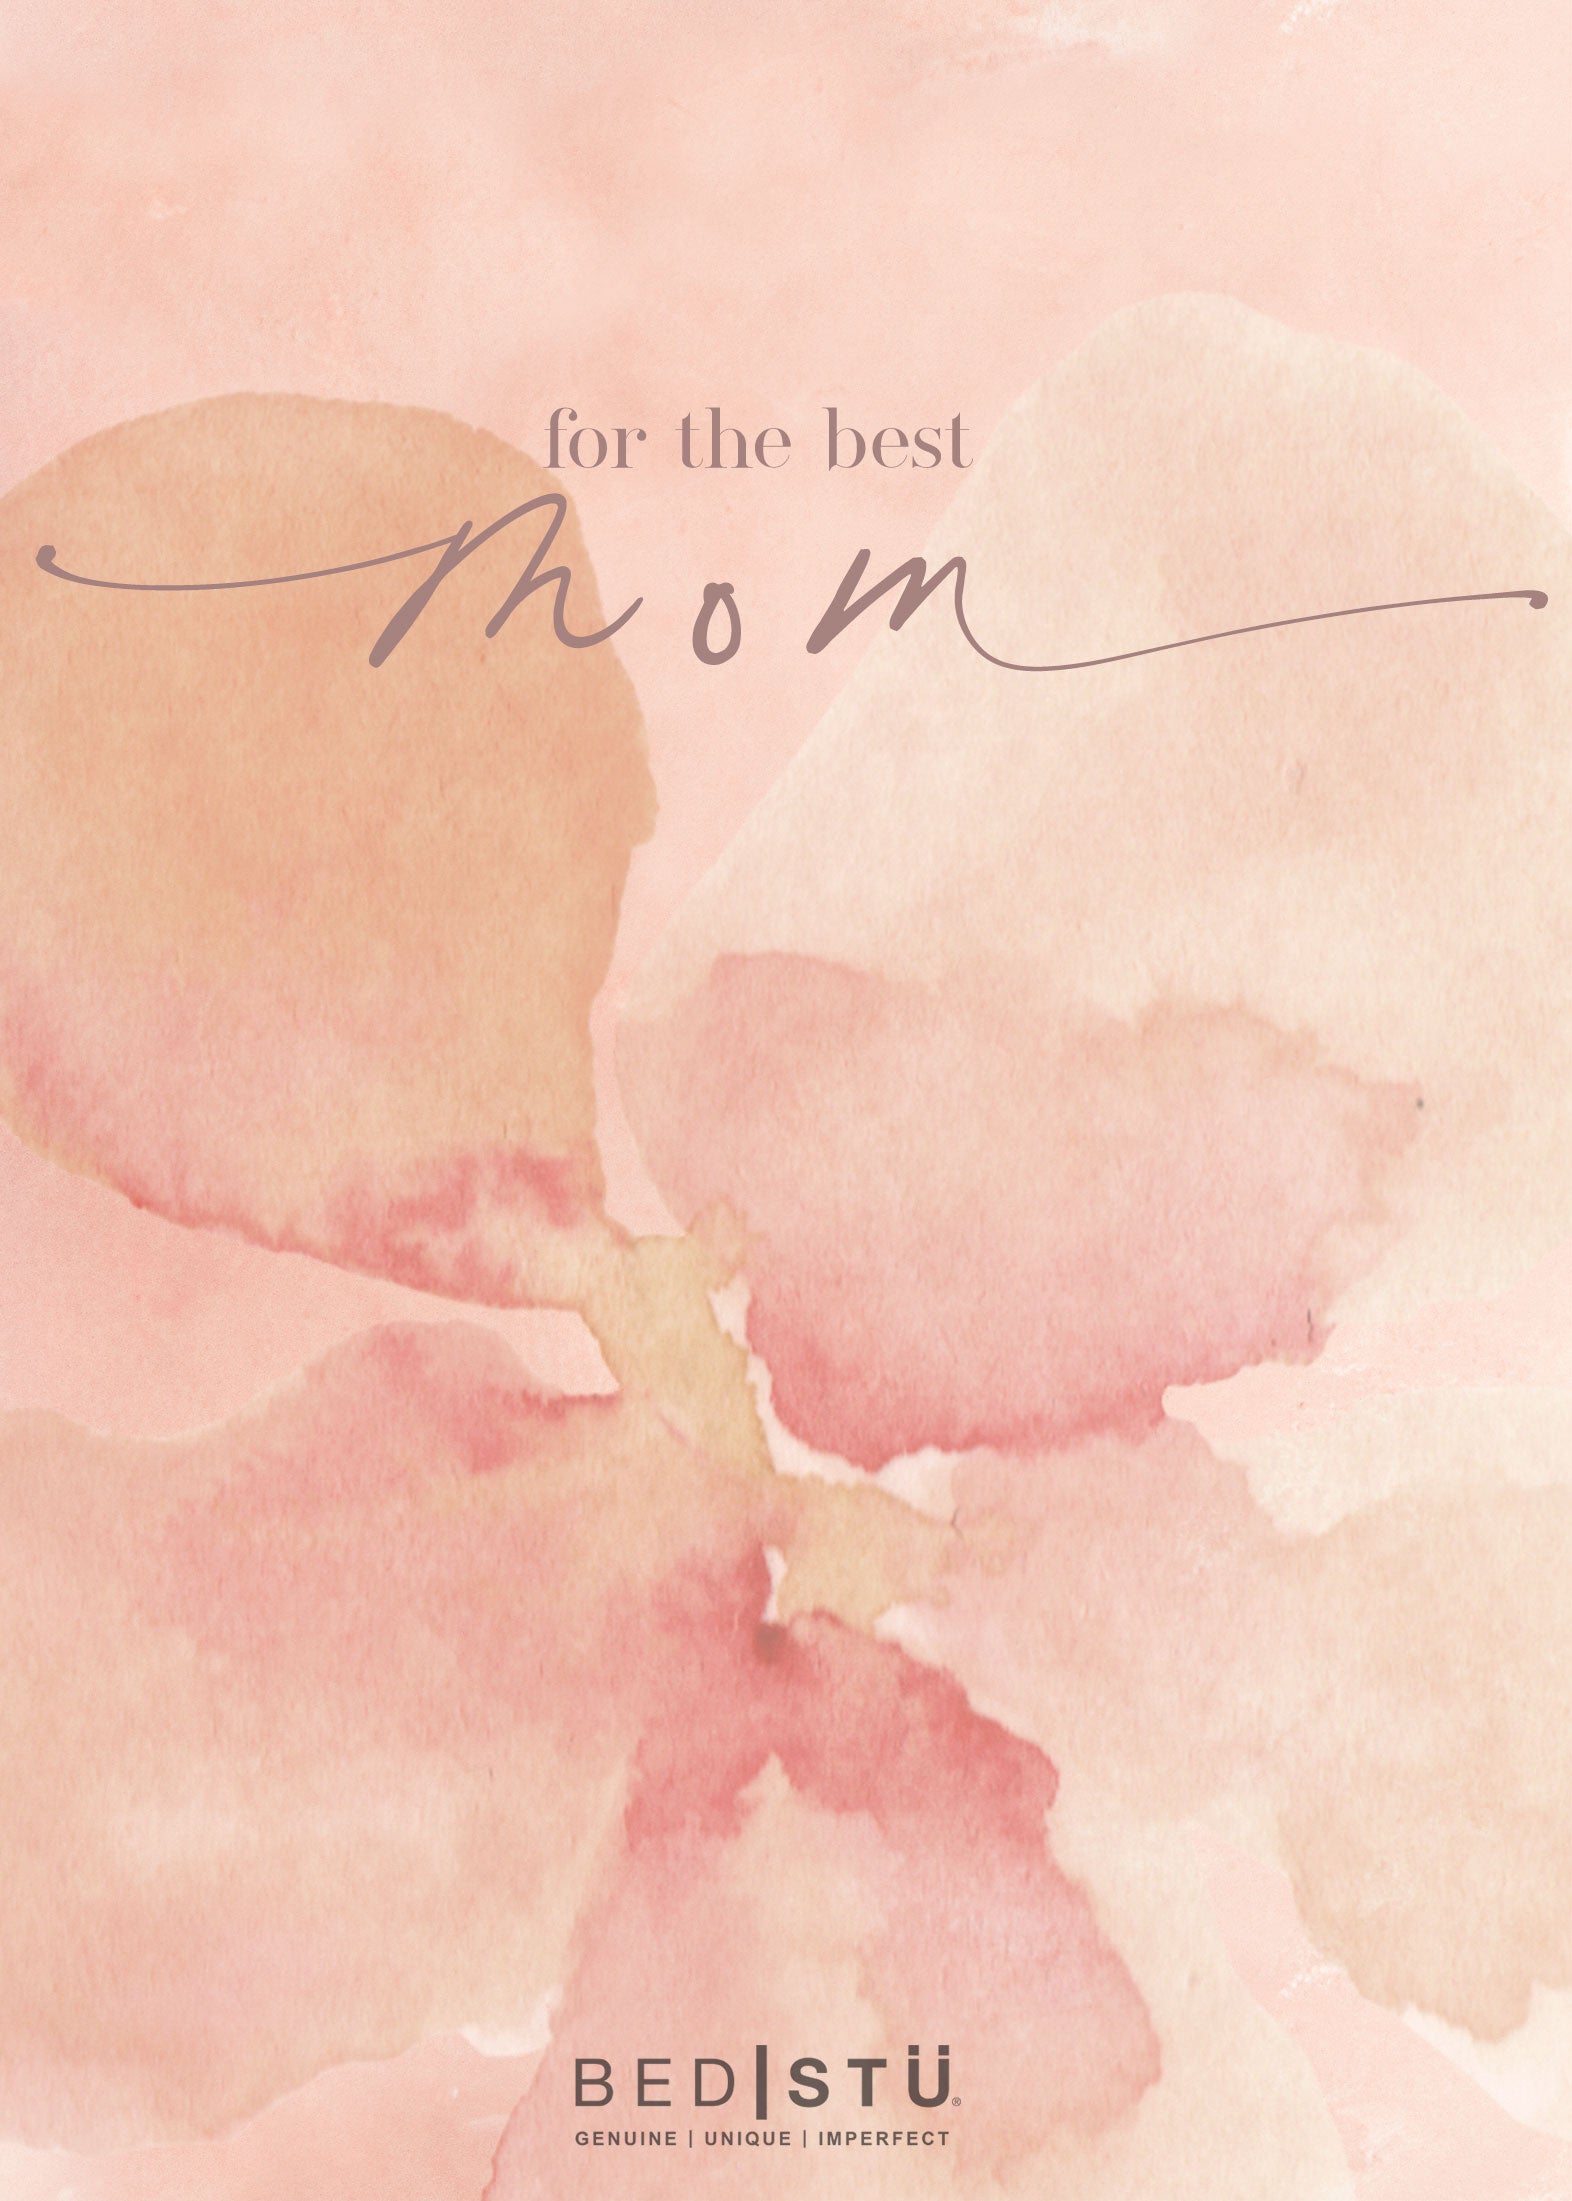 Pink watercolor background with abstract floral design and text that reads "For The Best Mom" in elegant script, and the word "bedstu.com" at the bottom.